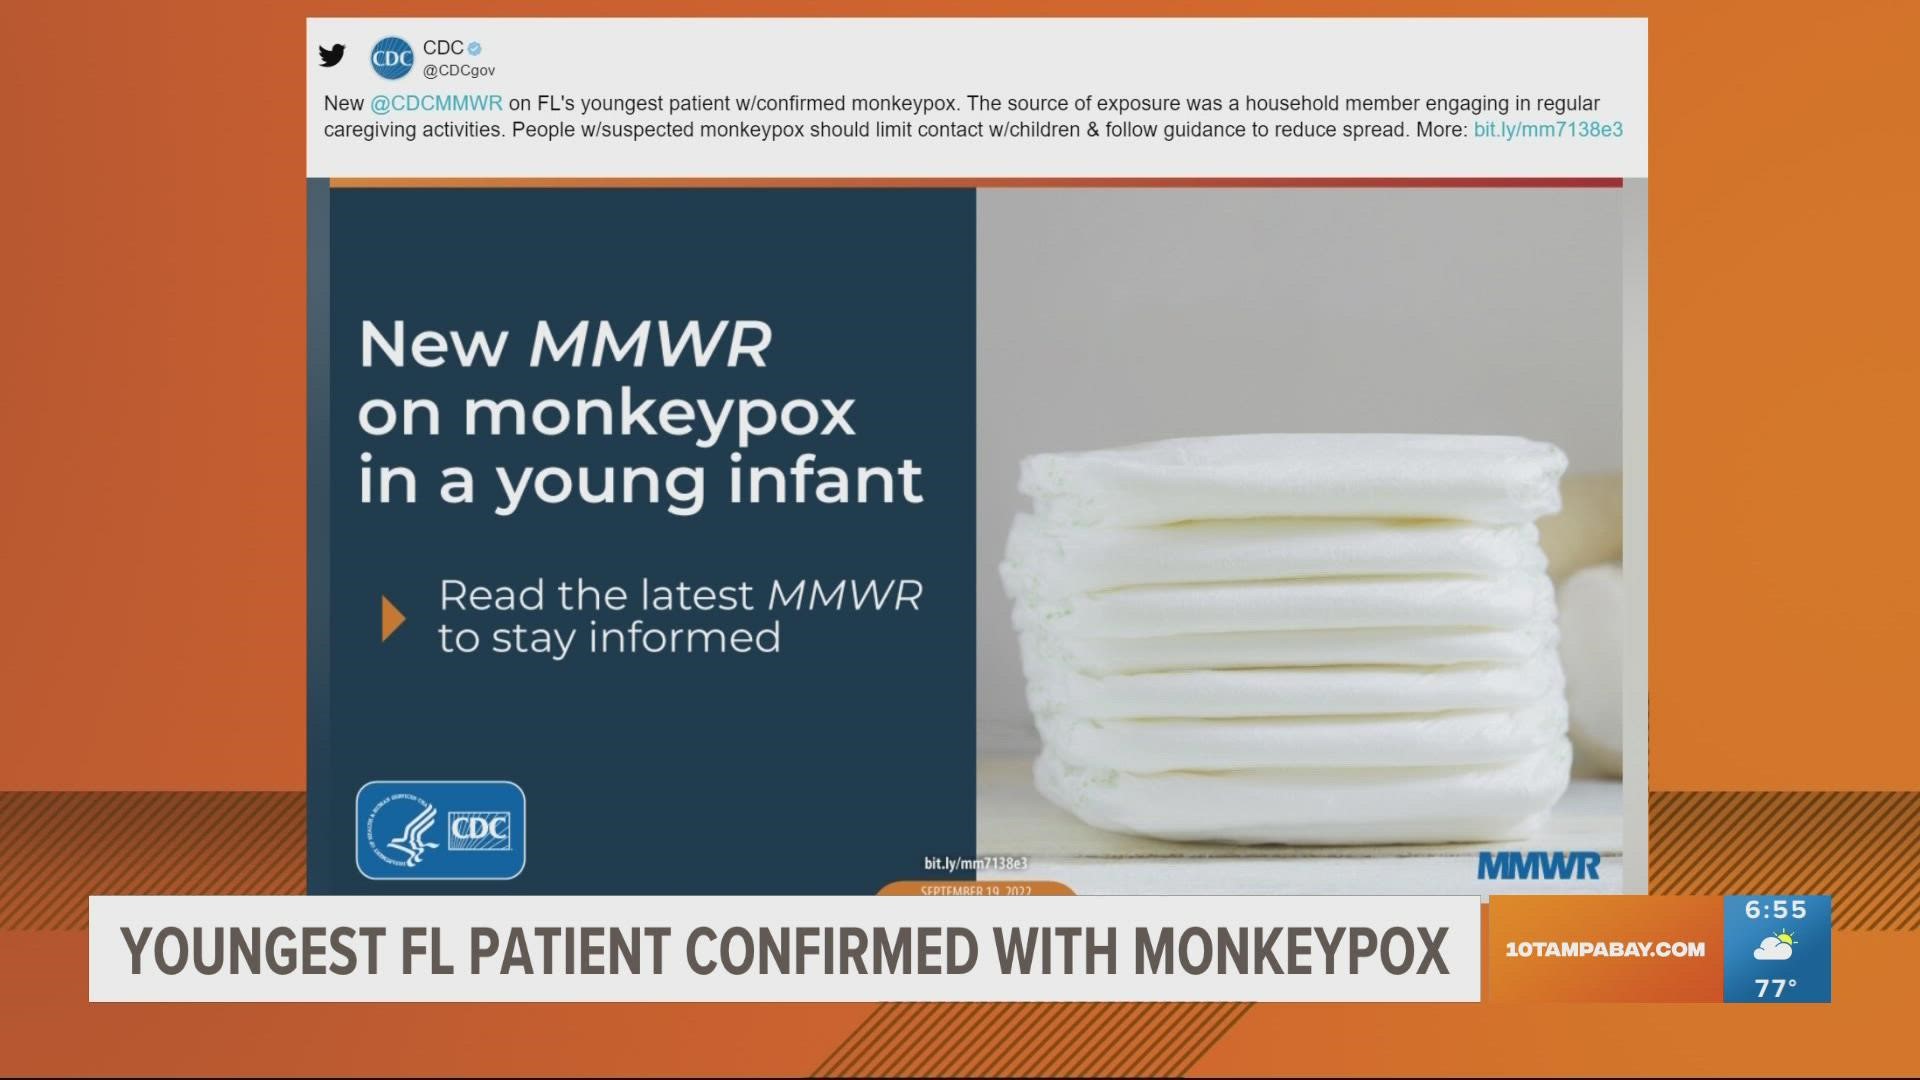 The Florida Department of Health was initially notified of the infant in August and confirmed the monkeypox case the same month.